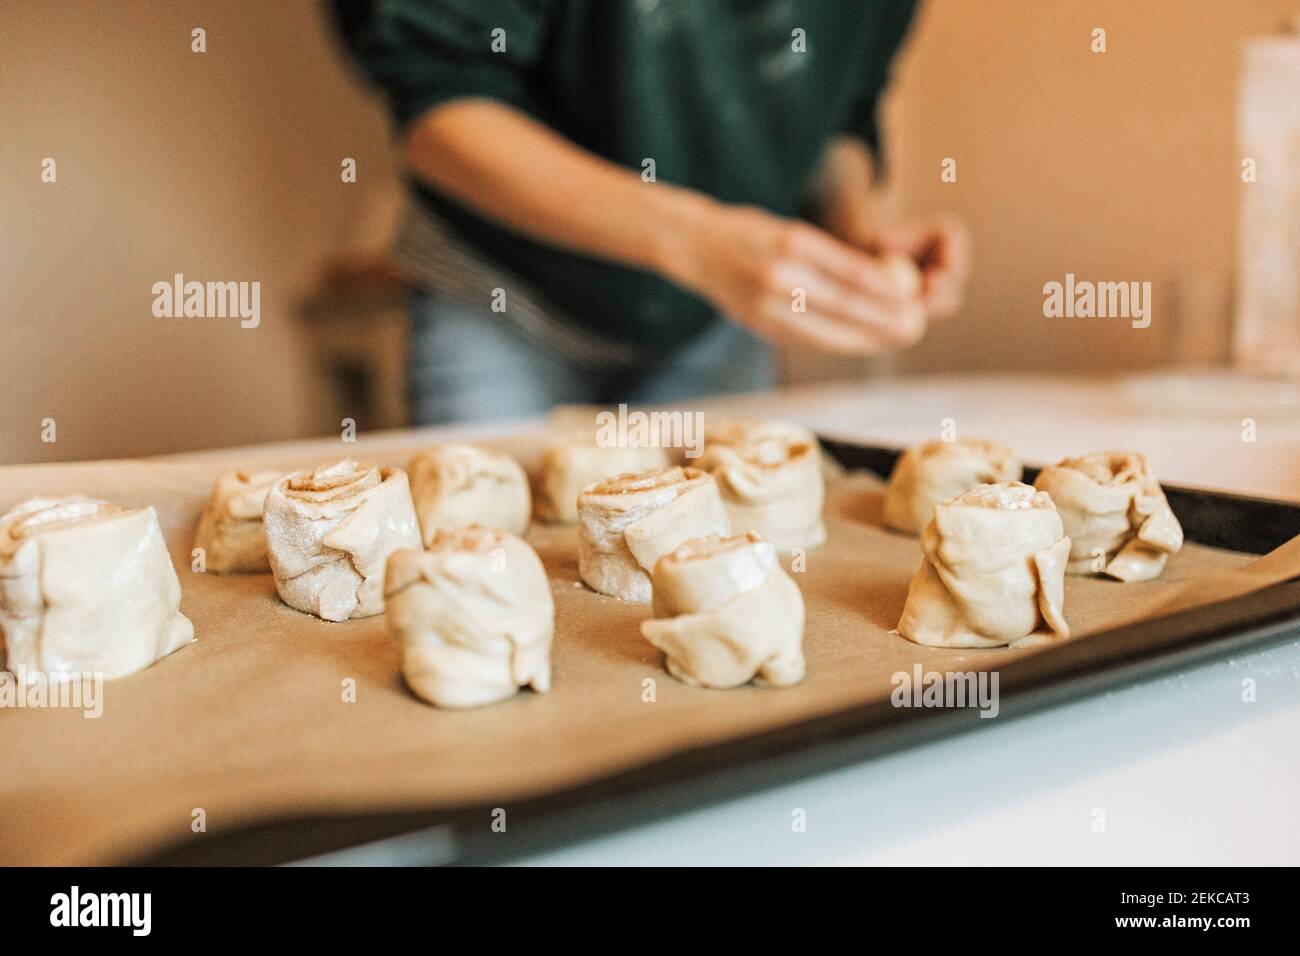 Arranged cinnamon rolls on baking sheet while woman in background at kitchen Stock Photo